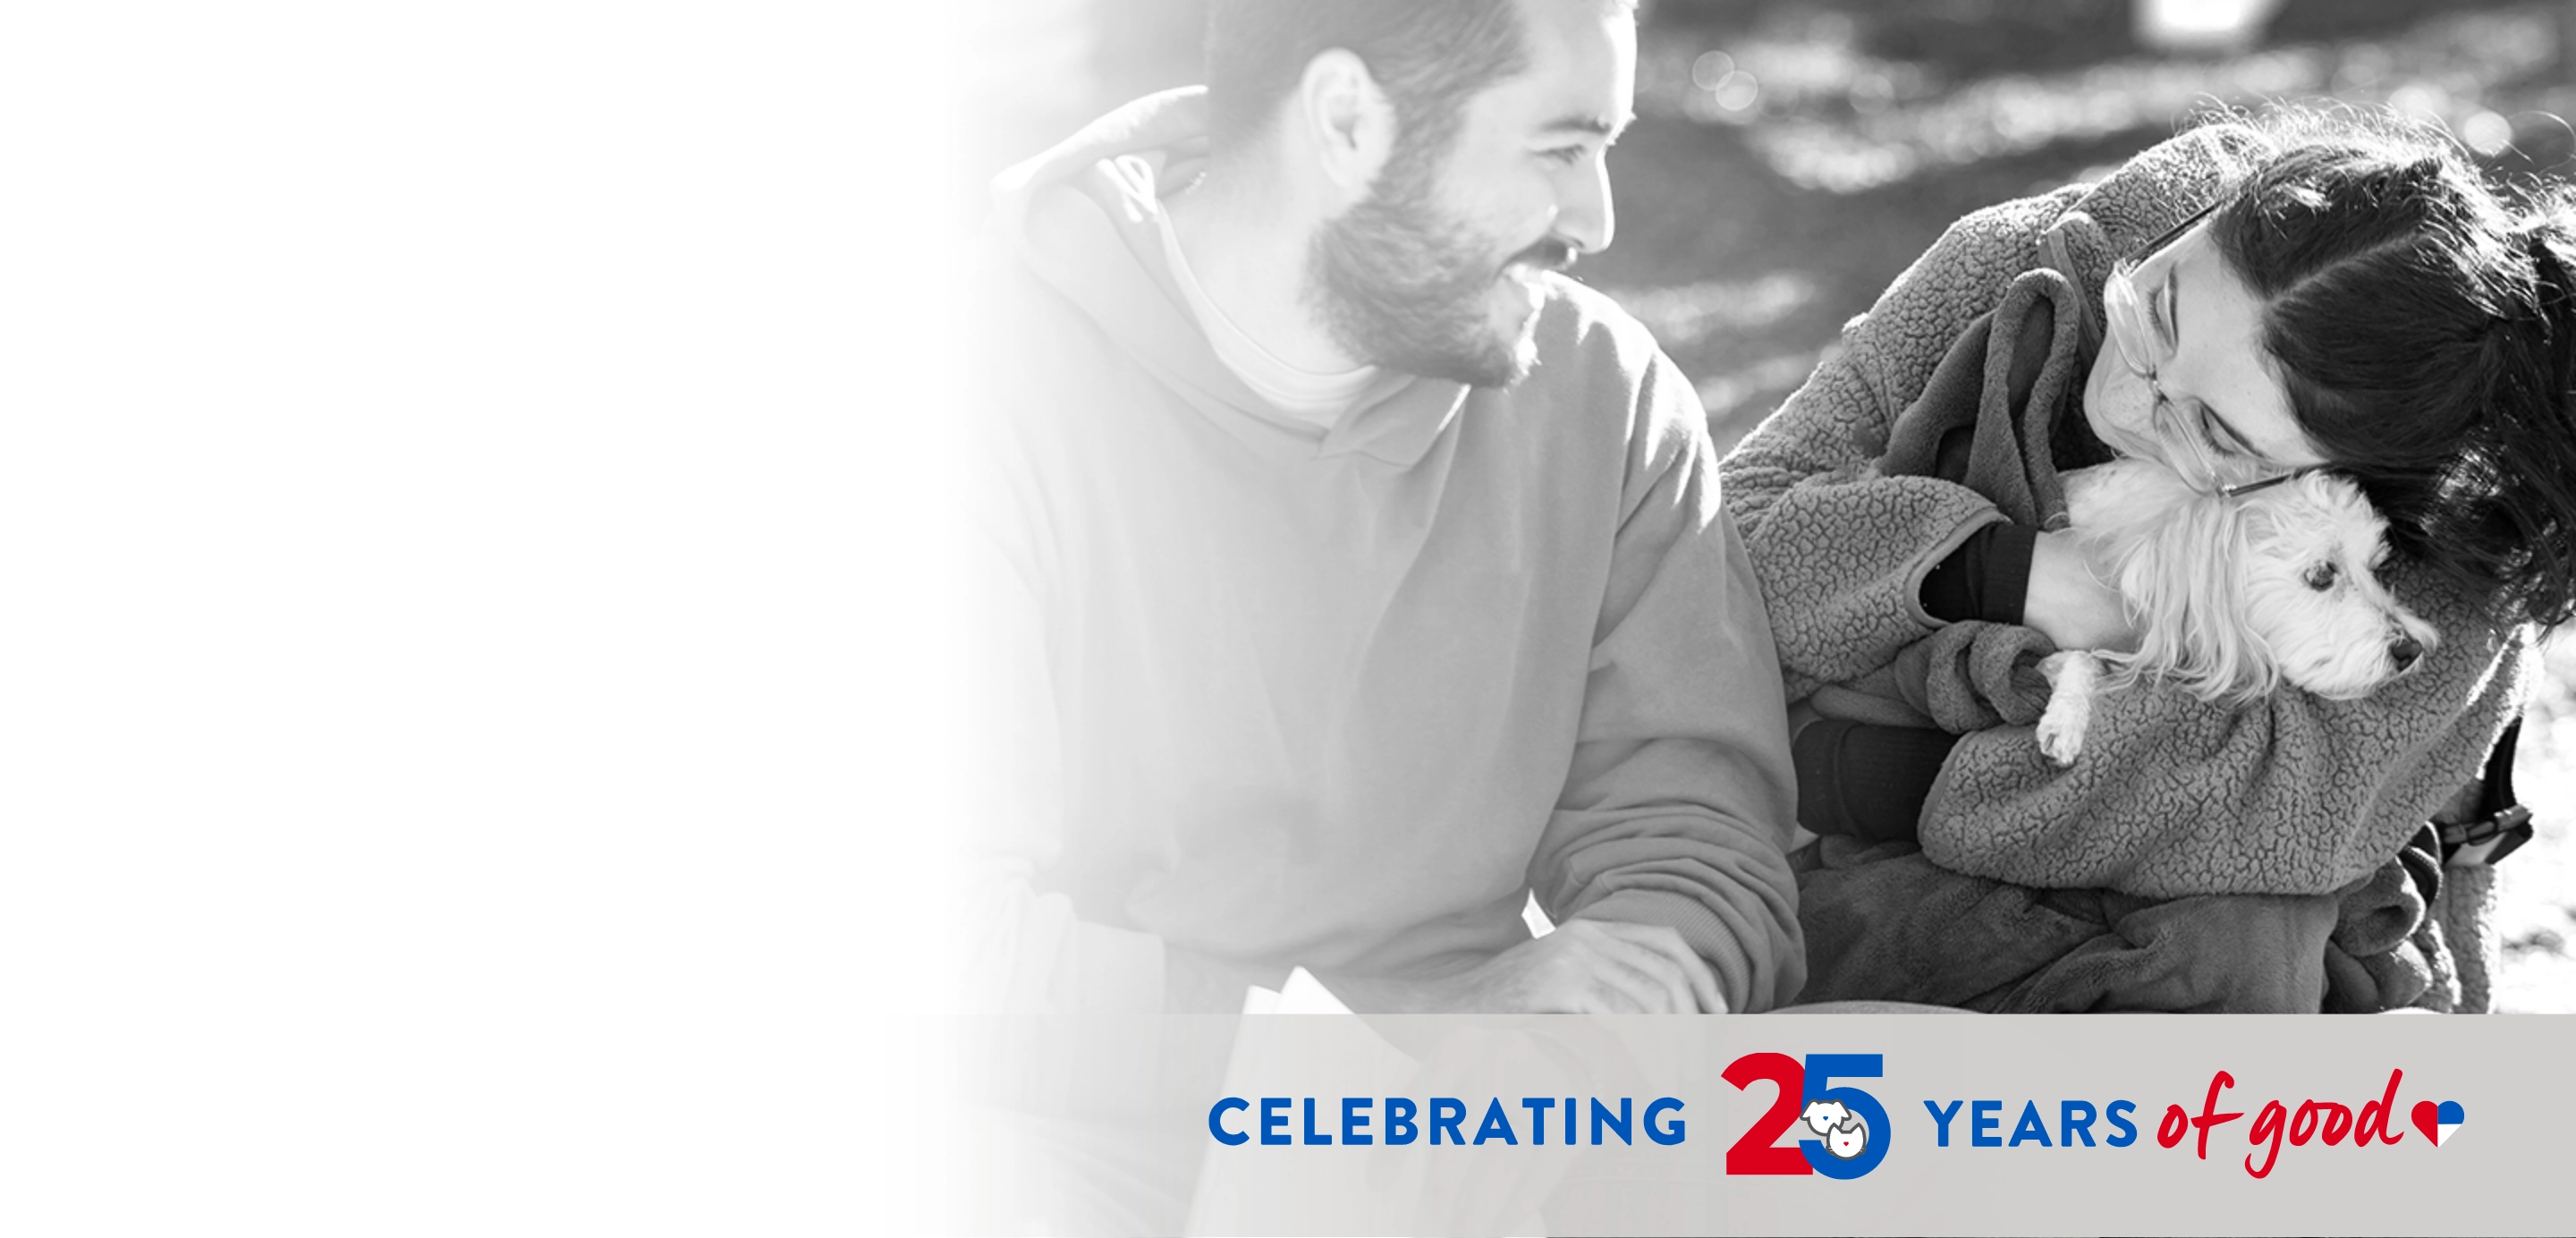 Man looks at a woman holding a small dog in her arms, text that reads "Celebrating 25 Years of Good"